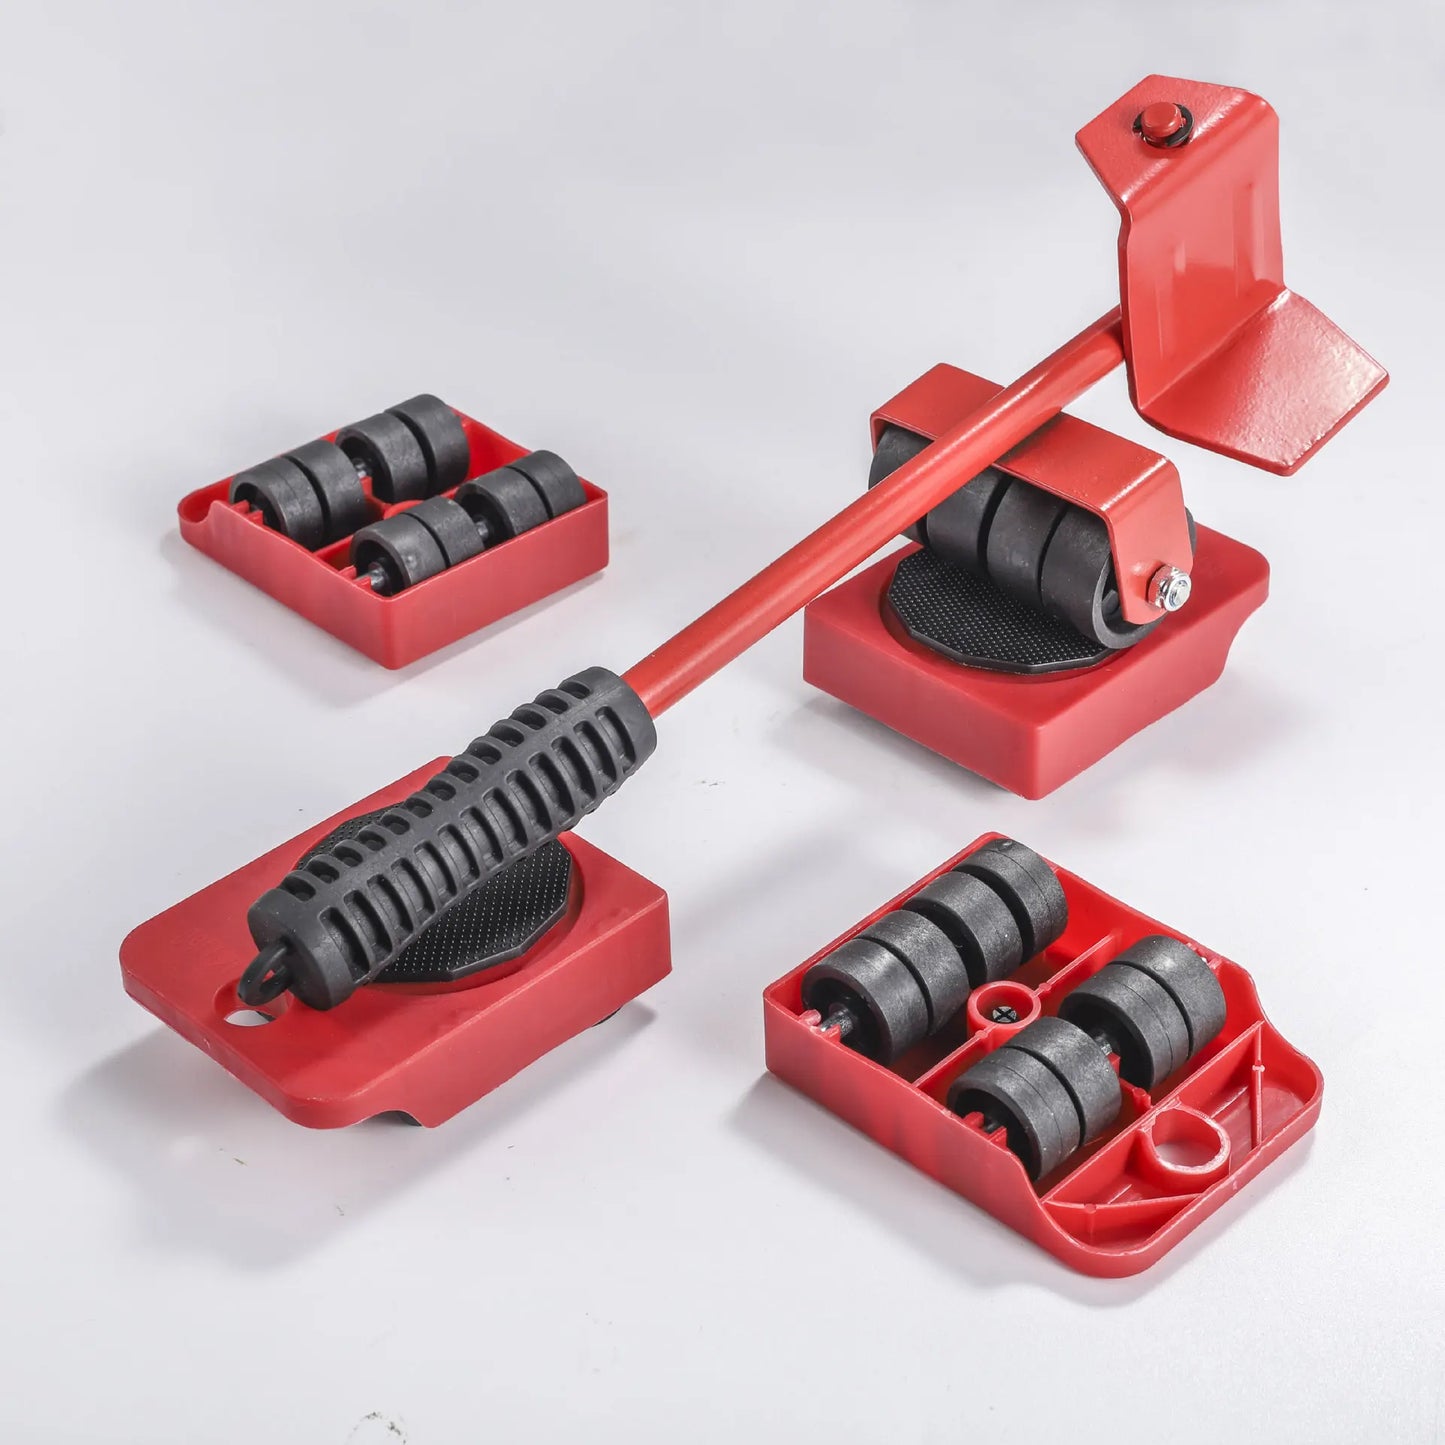 NEW EasyPusher - Practical furniture lifter and roller as an aid 5-piece set